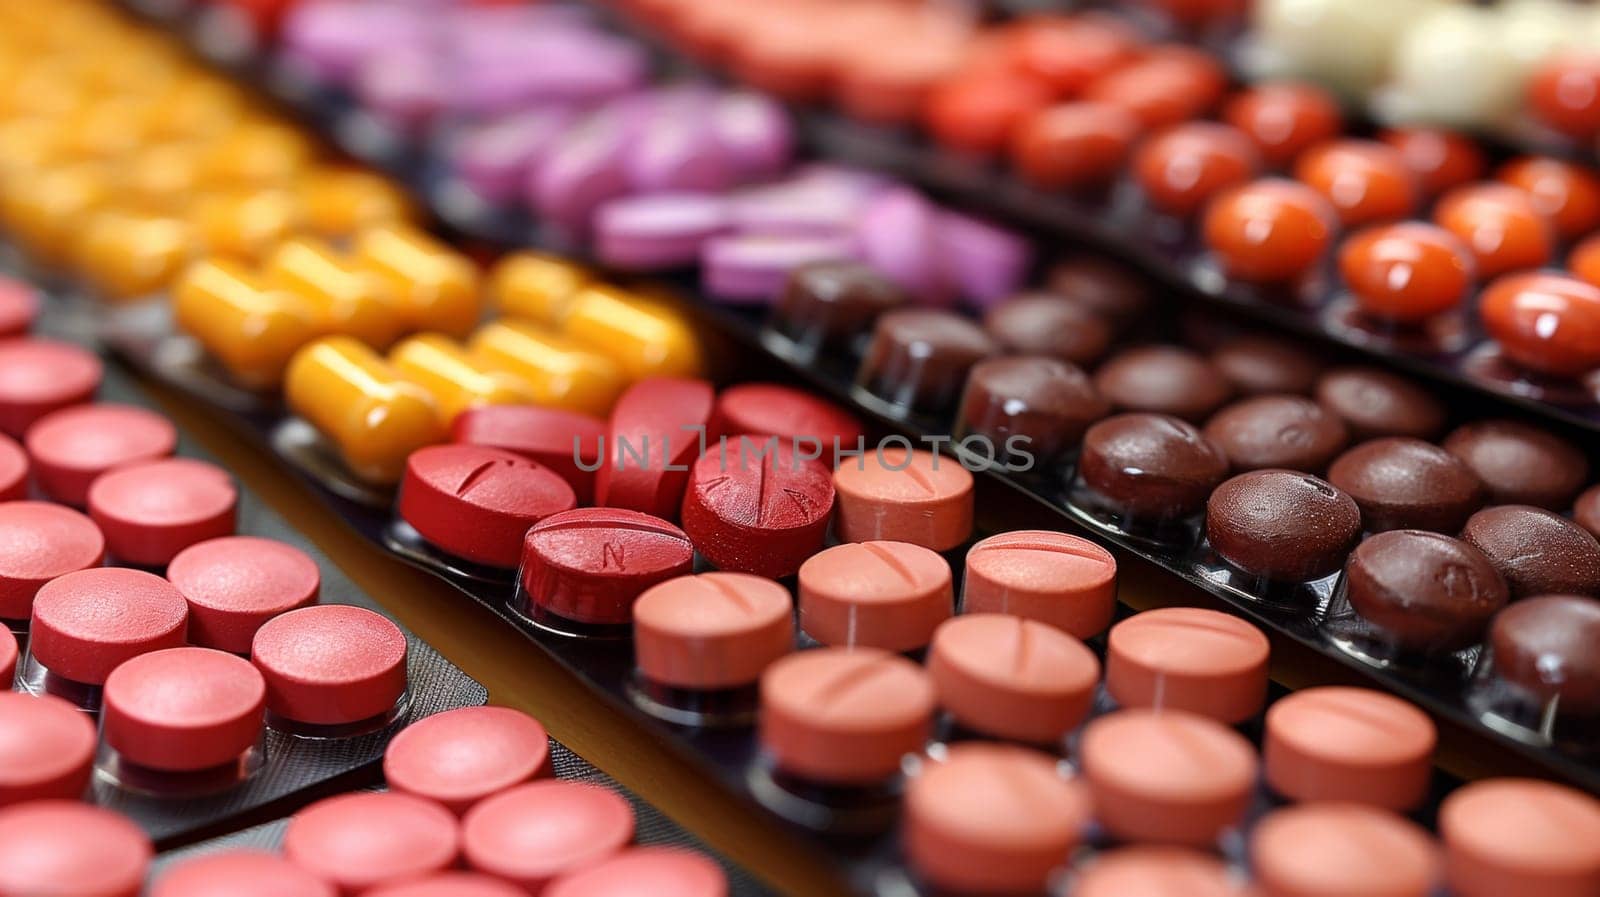 A display of a variety of colorful pills and capsules in plastic trays